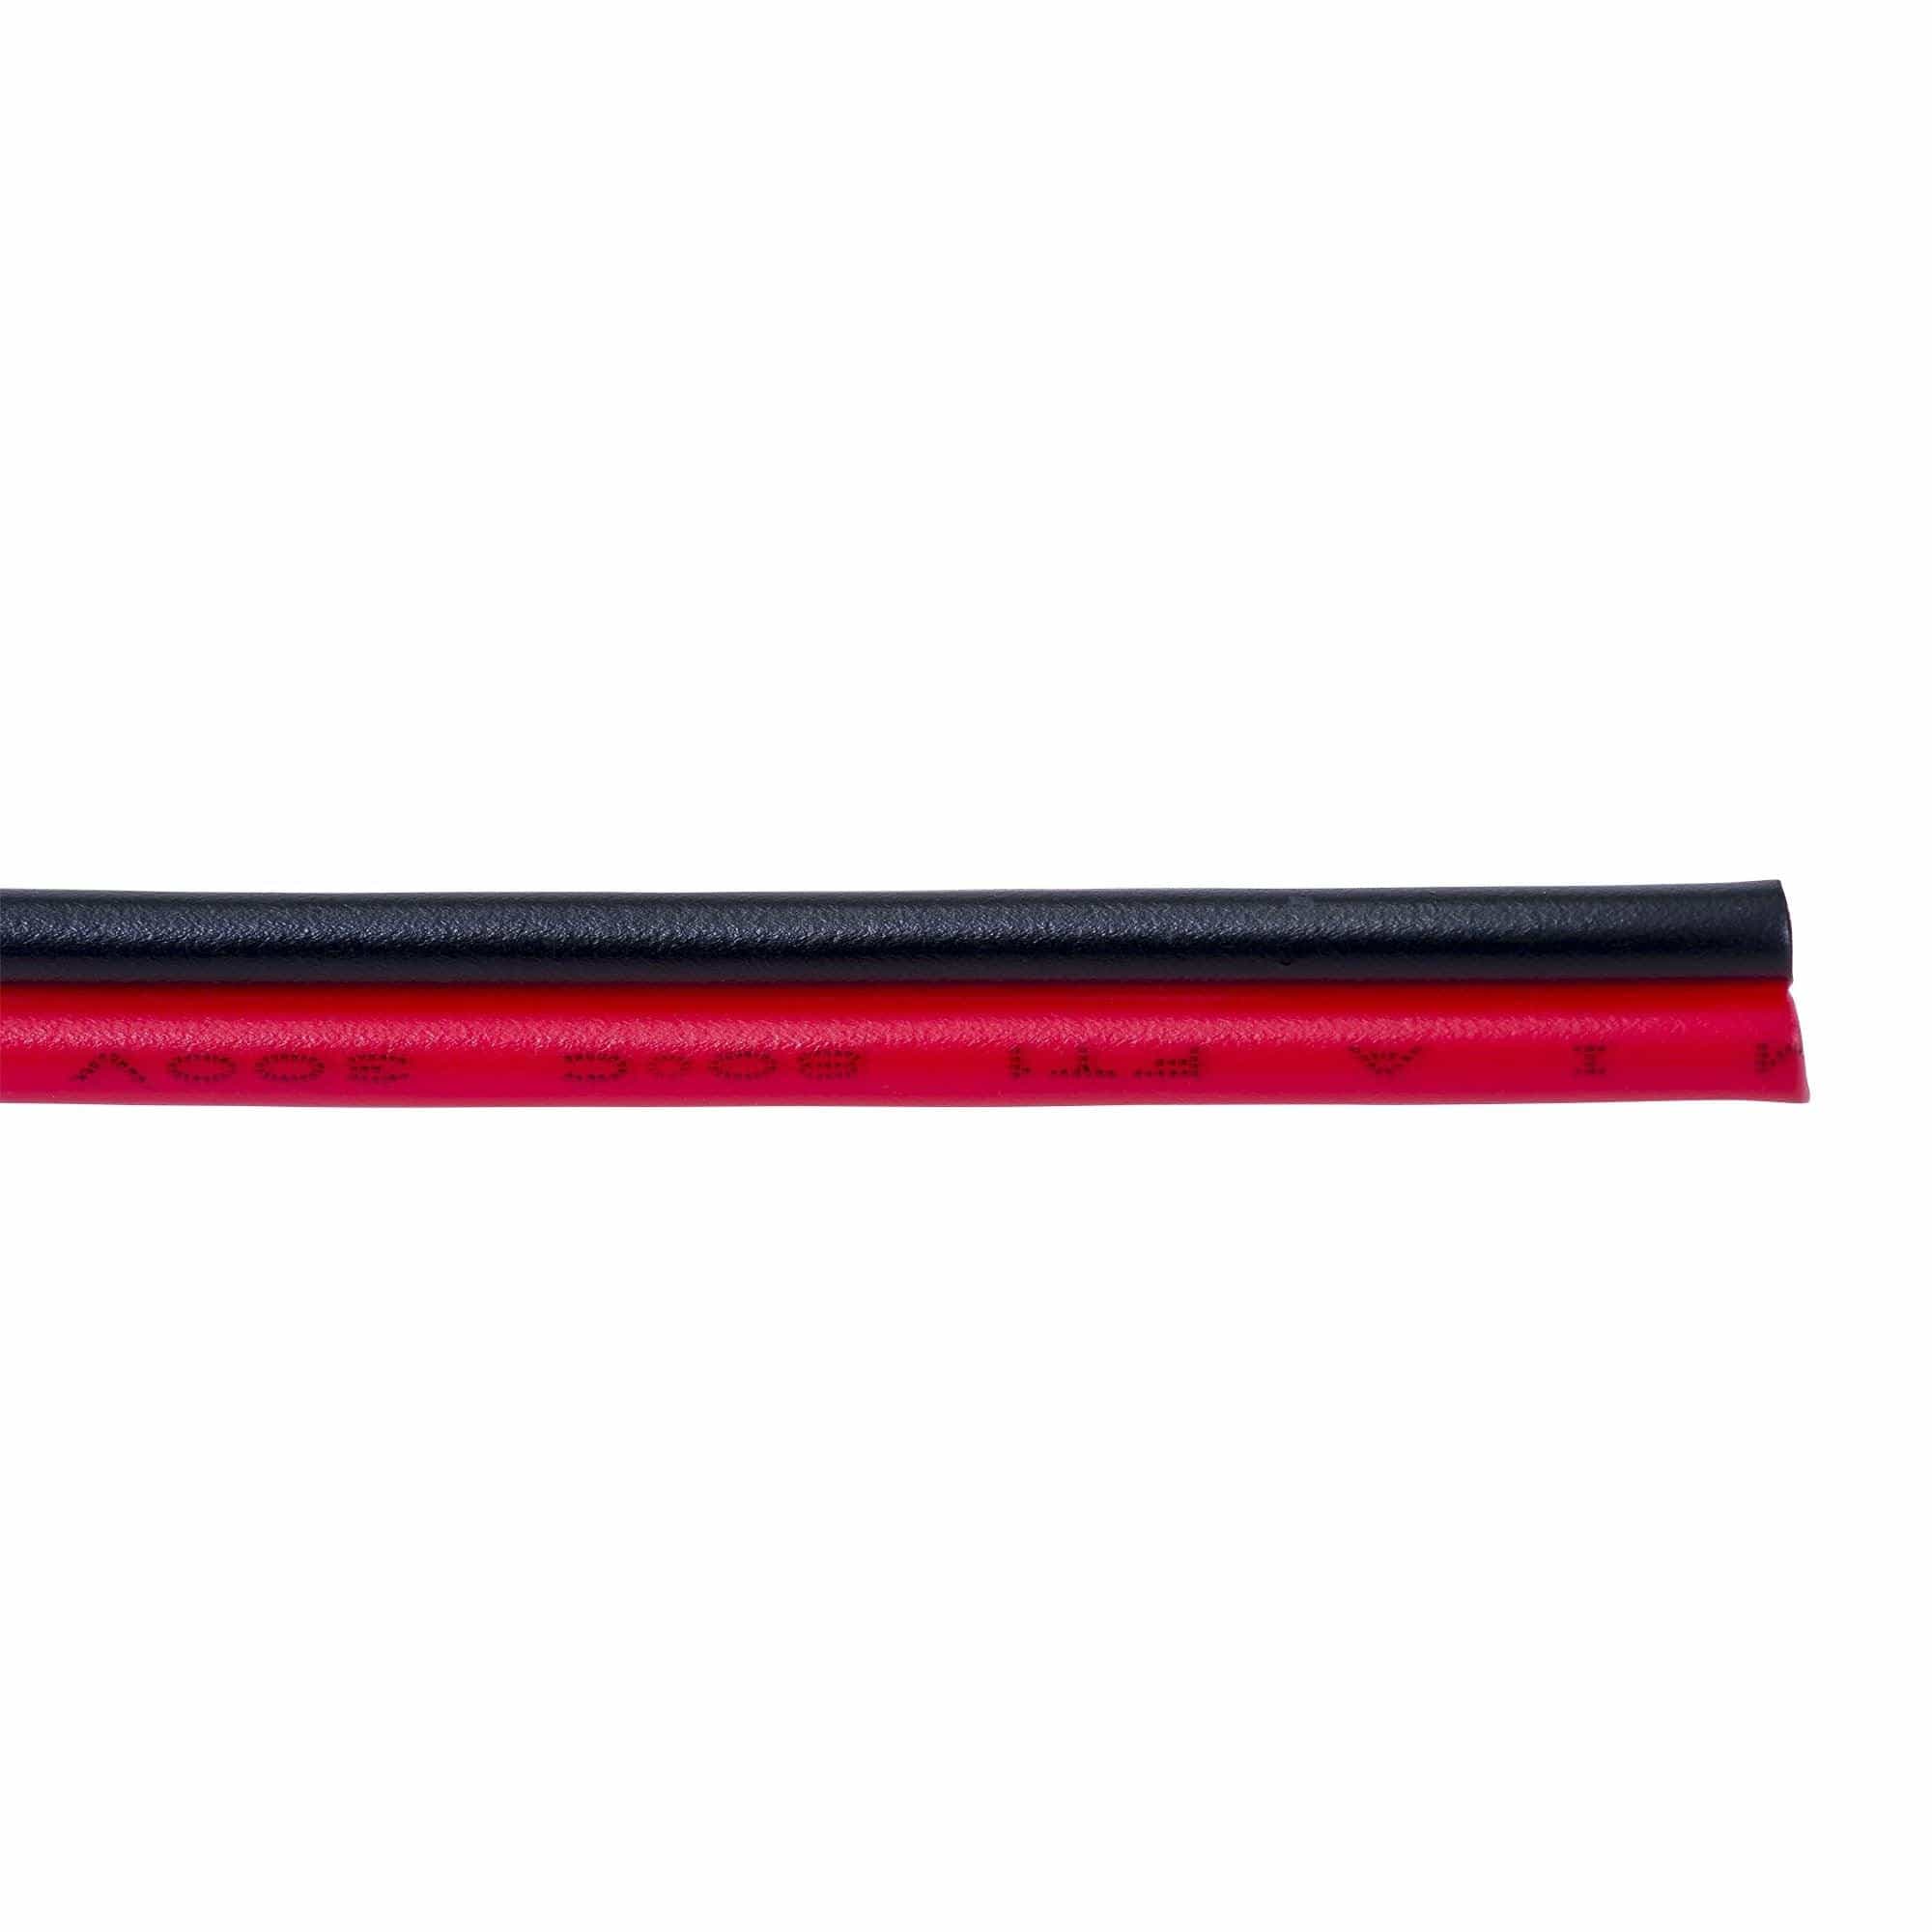 Havit Lighting Cable Black HV9981 - 2 Core red and black cable by Havit Lighting Lights-For-You HV9981